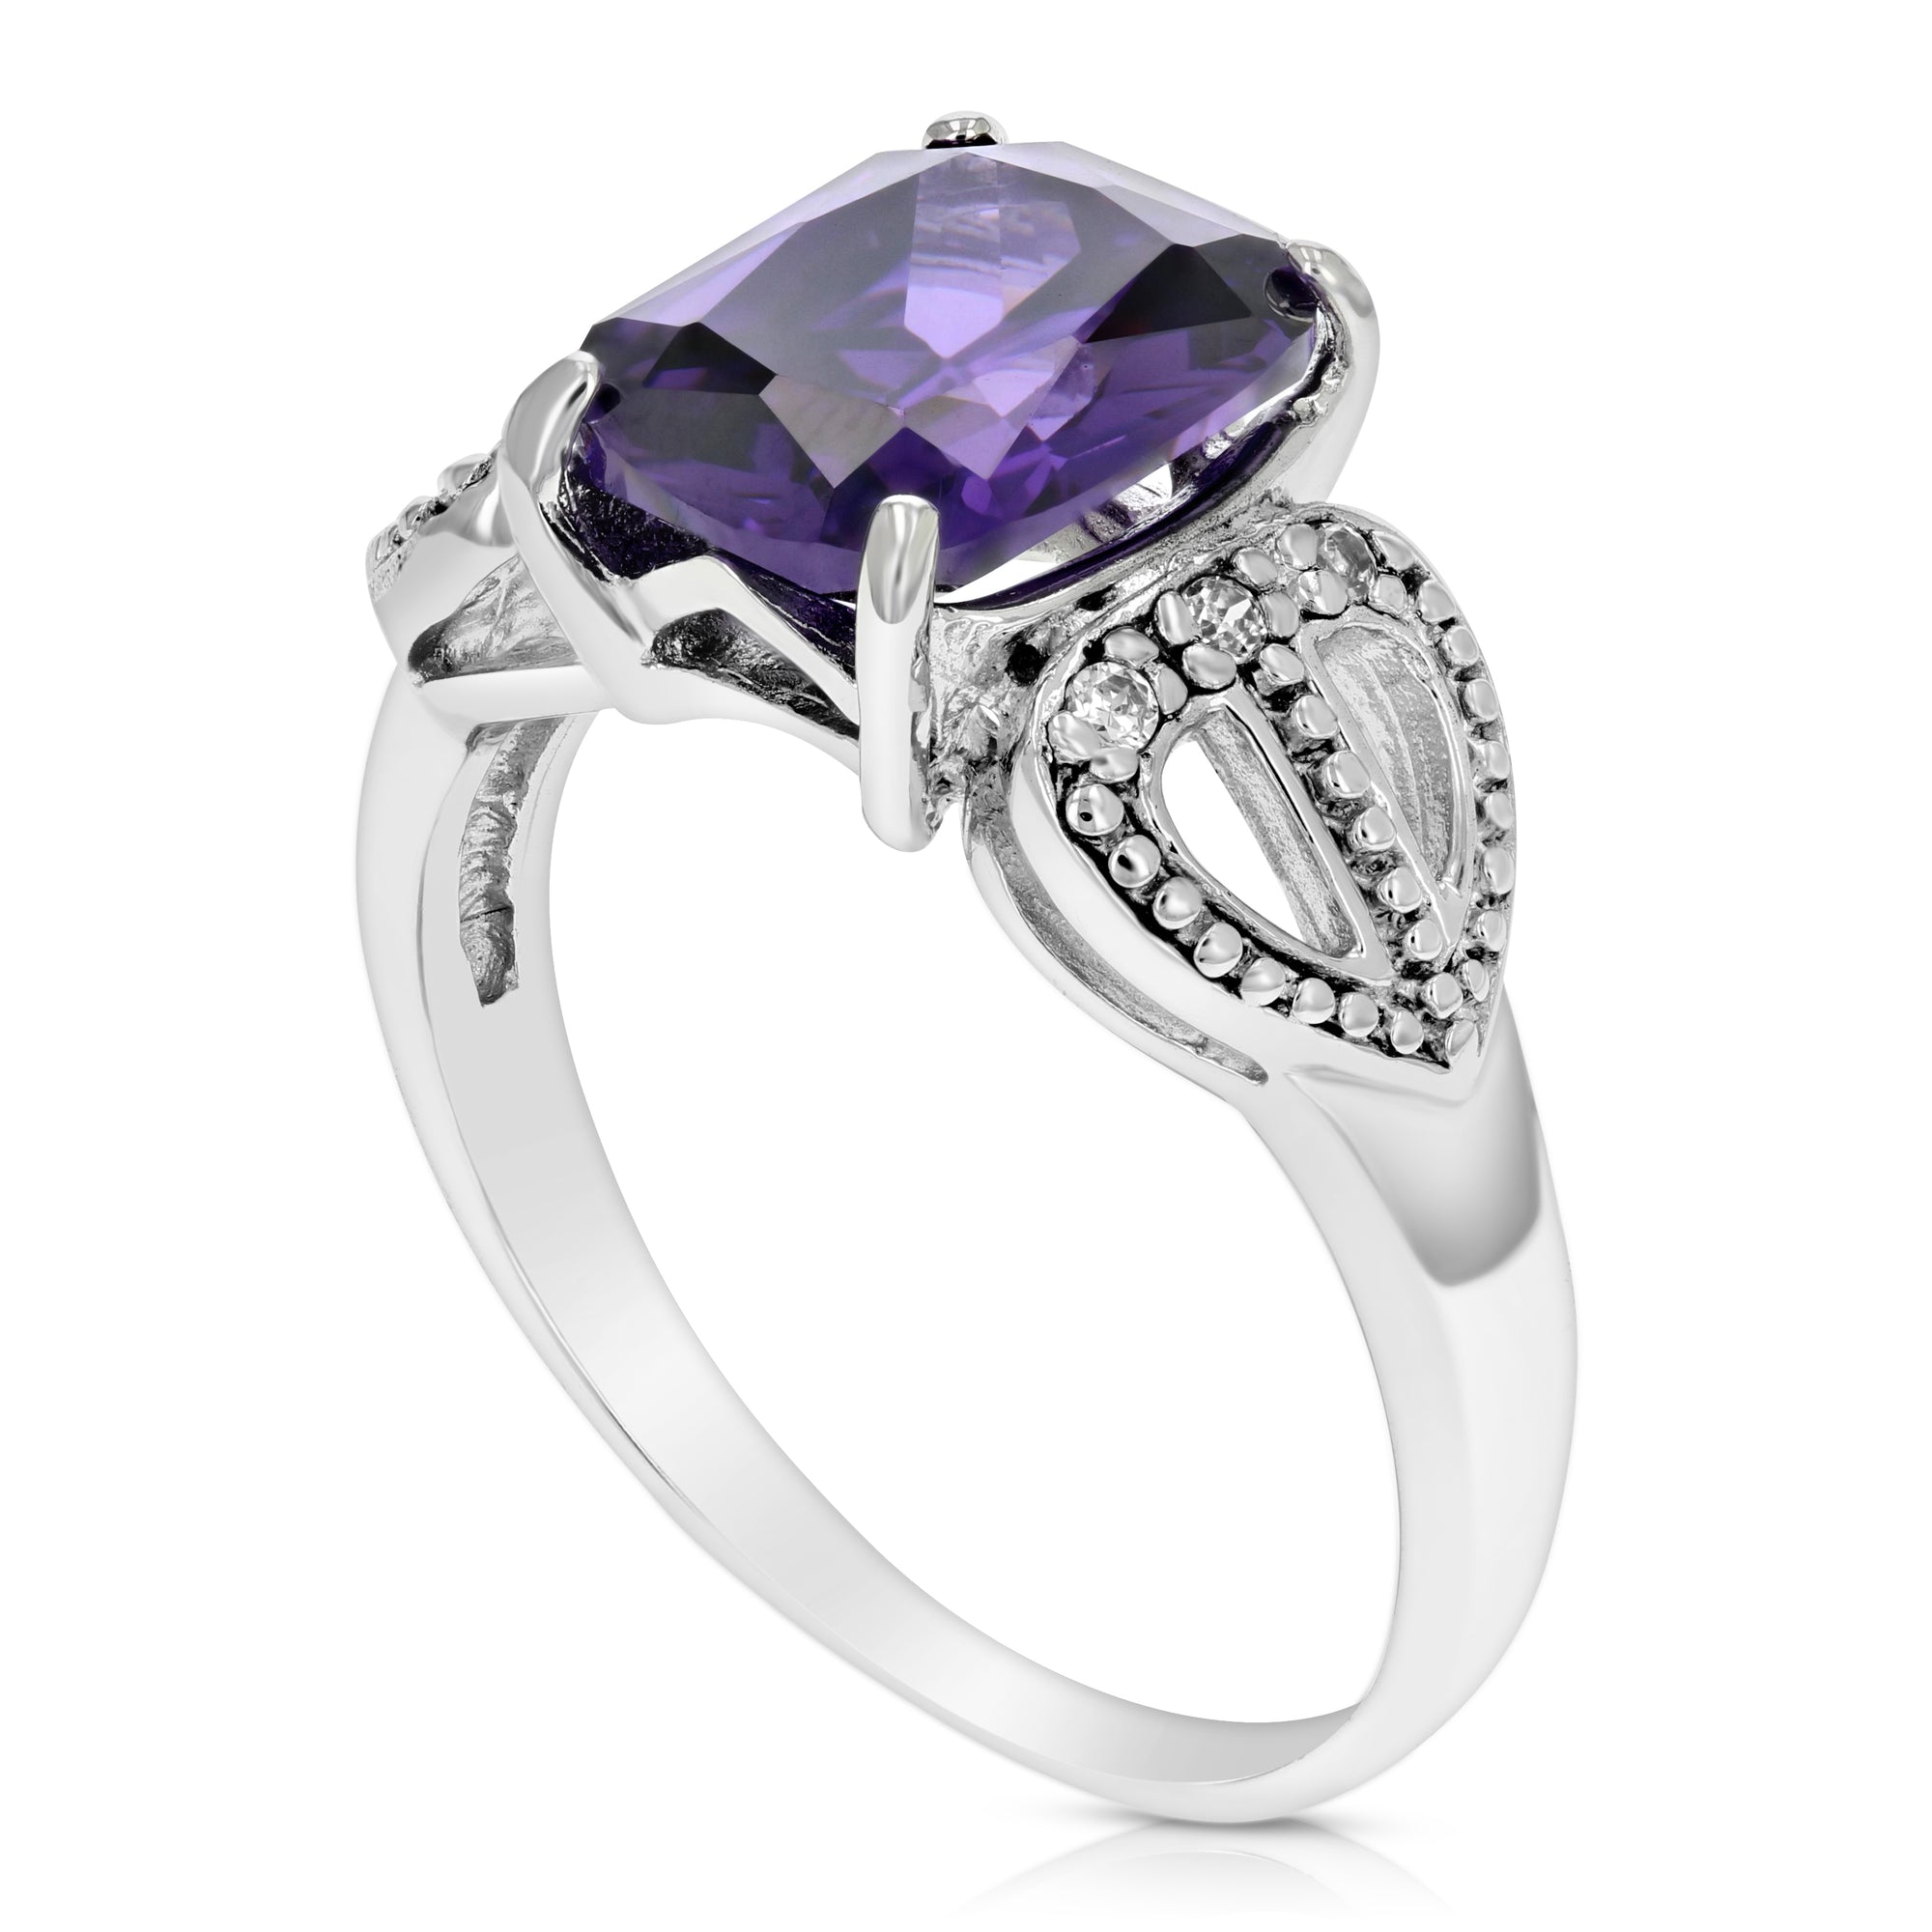 10x8 MM Purple Cubic Zirconia Ring .925 Sterling Silver with Rhodium Emerald